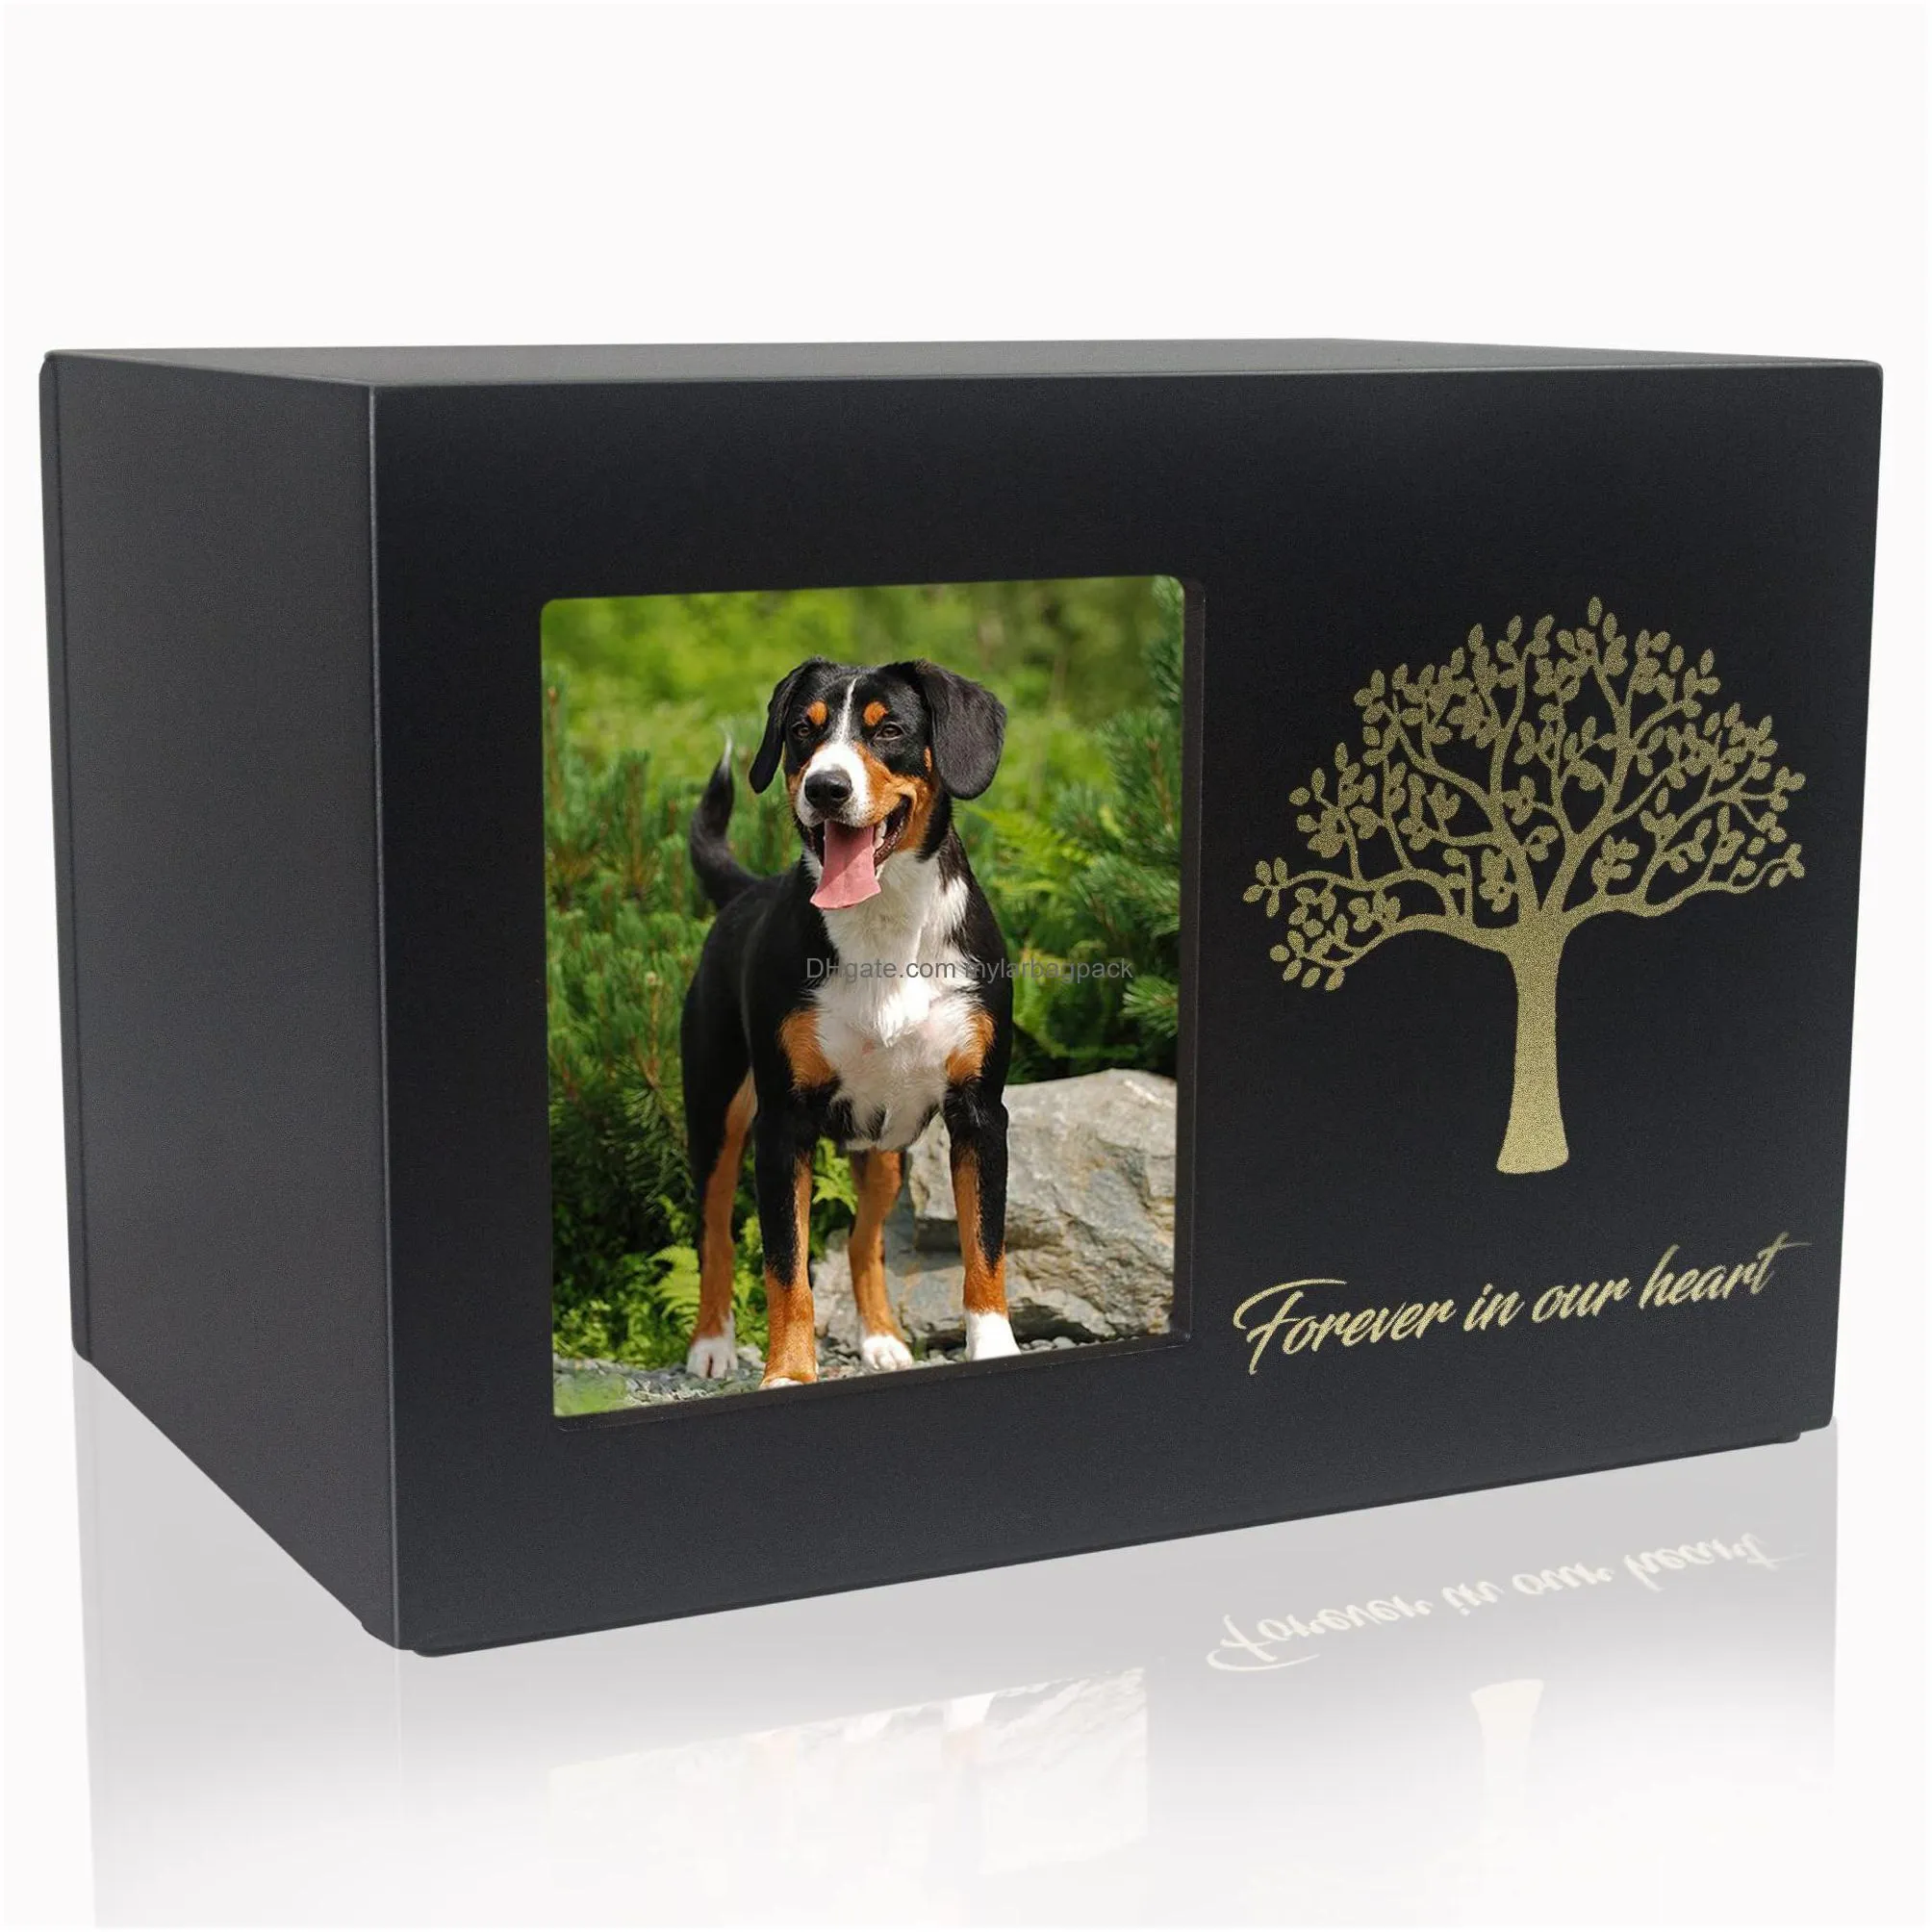 pet memorial urns for dogs or cats ashes wooden pet cremation urns with personalized photo frame pet memorial keepsake box loss pet sympathy remembrance